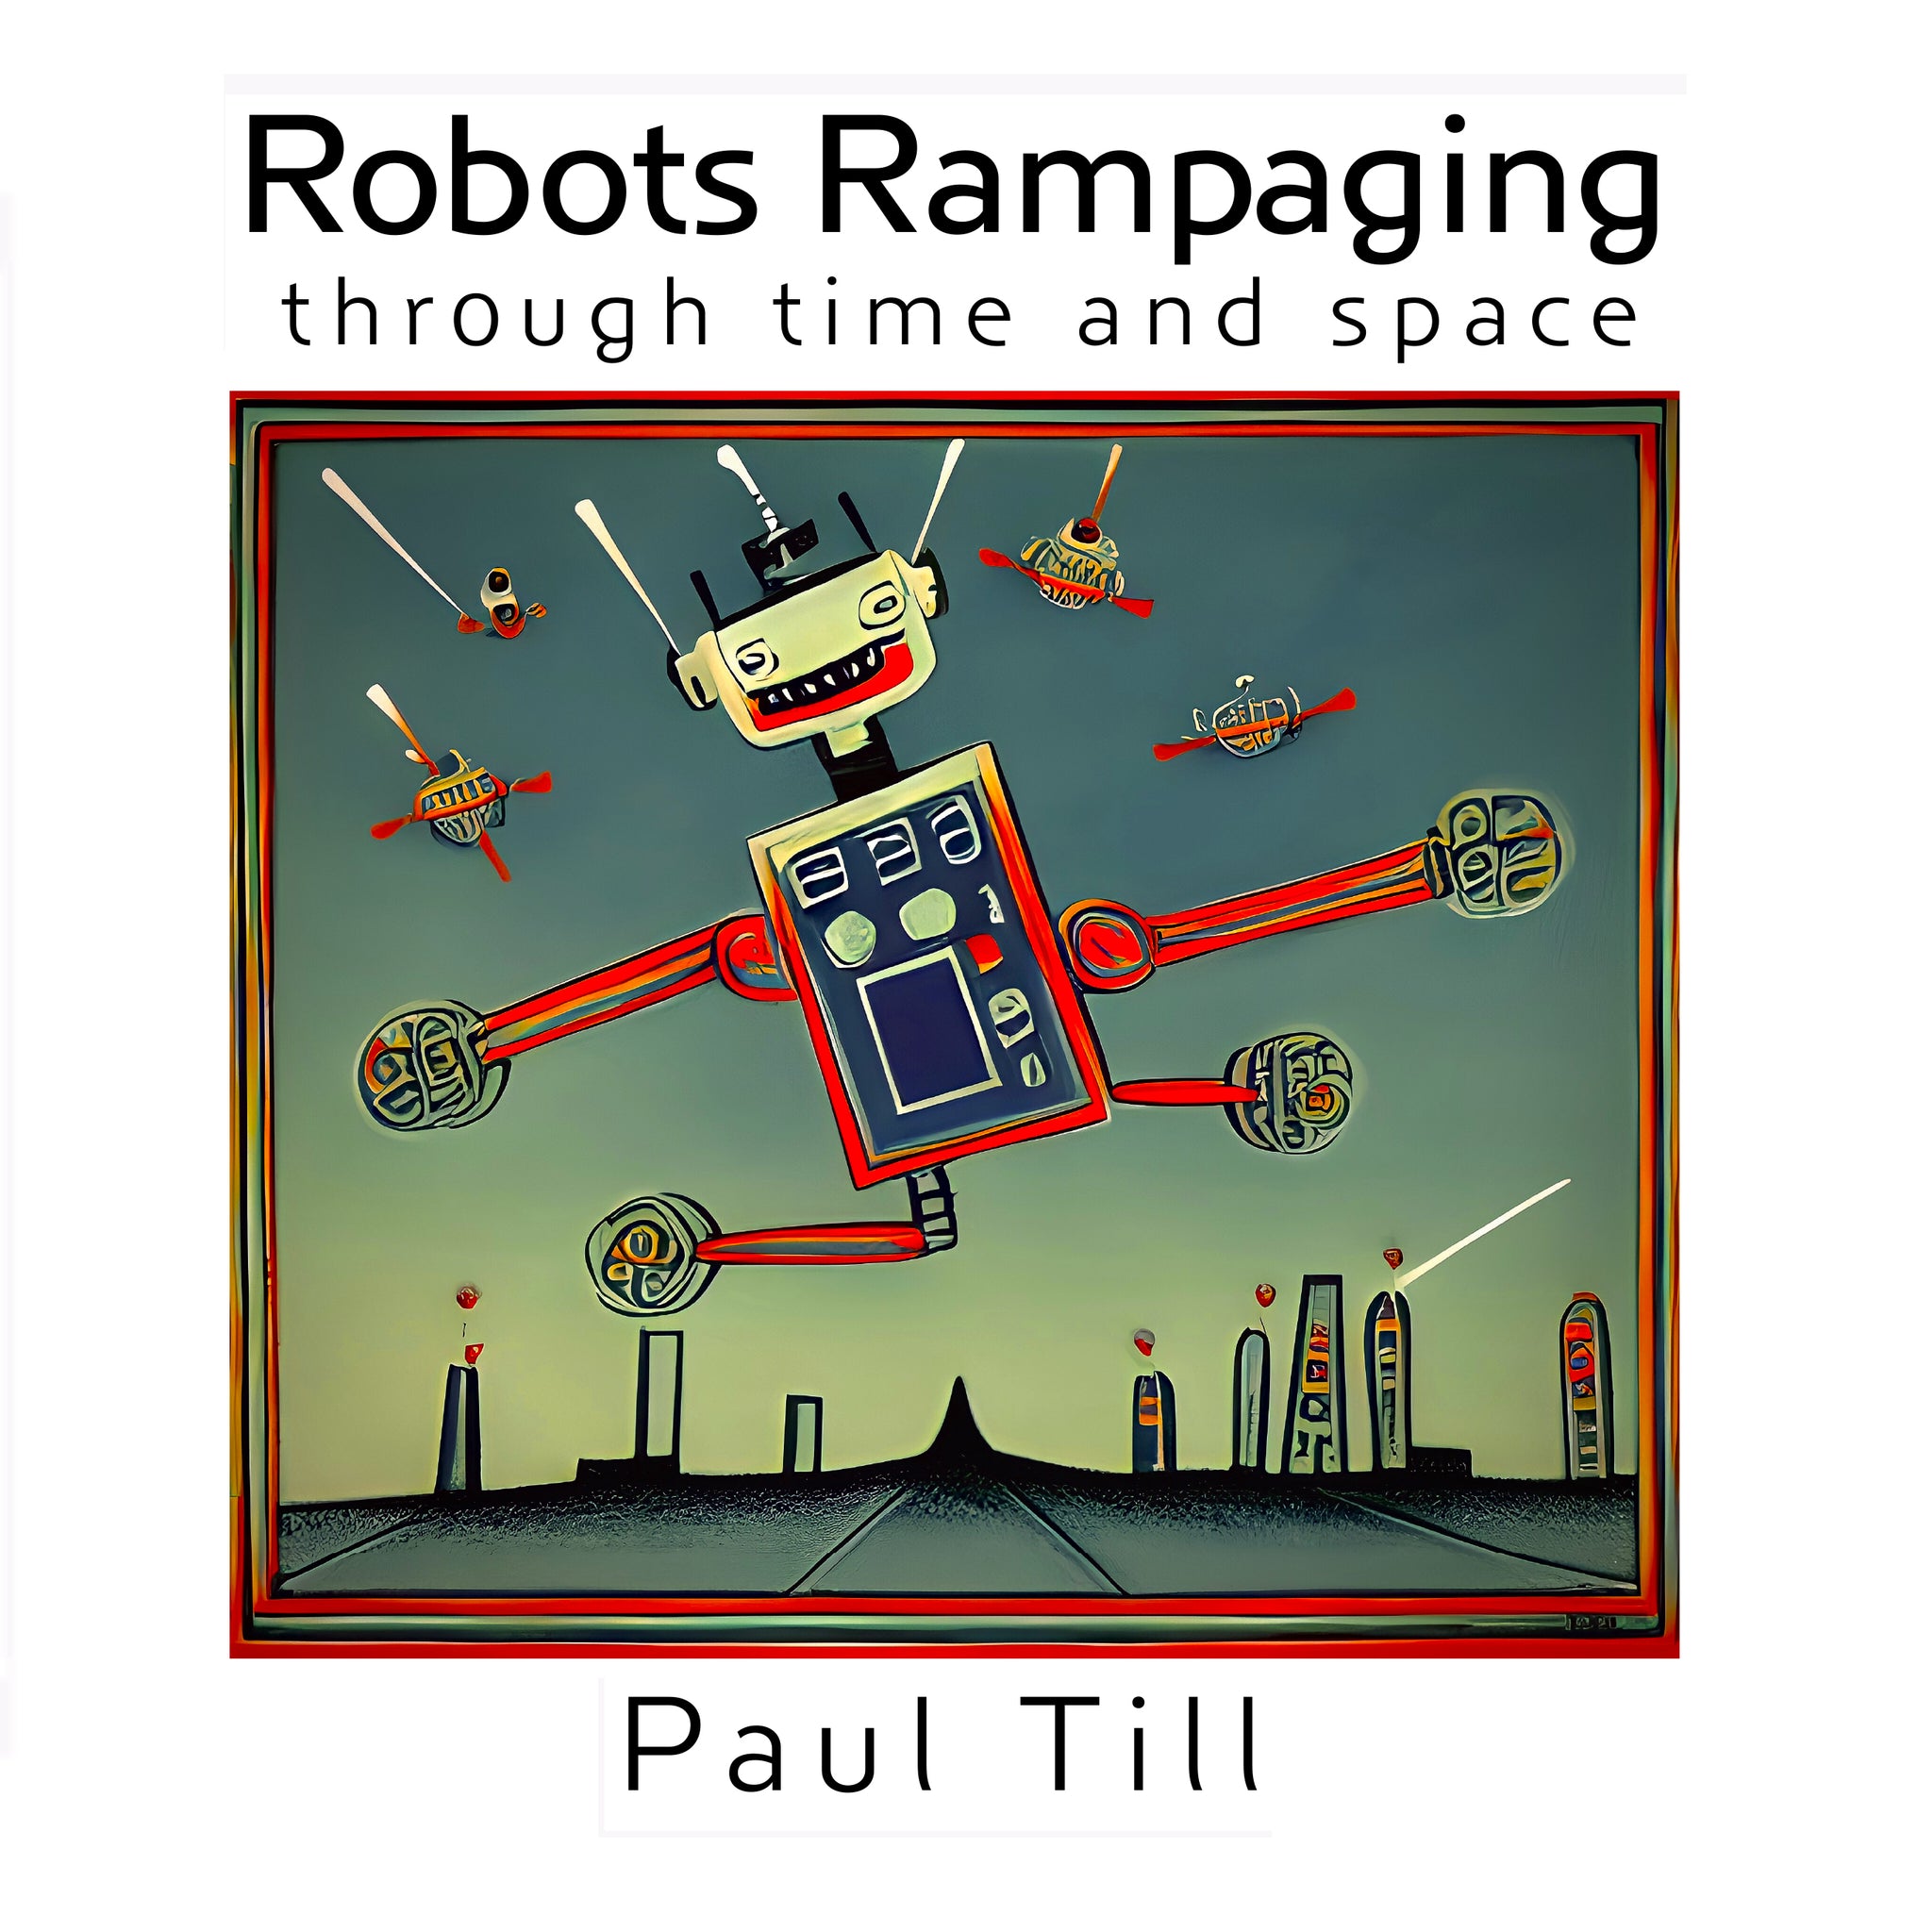 Robots Rampaging through time and space